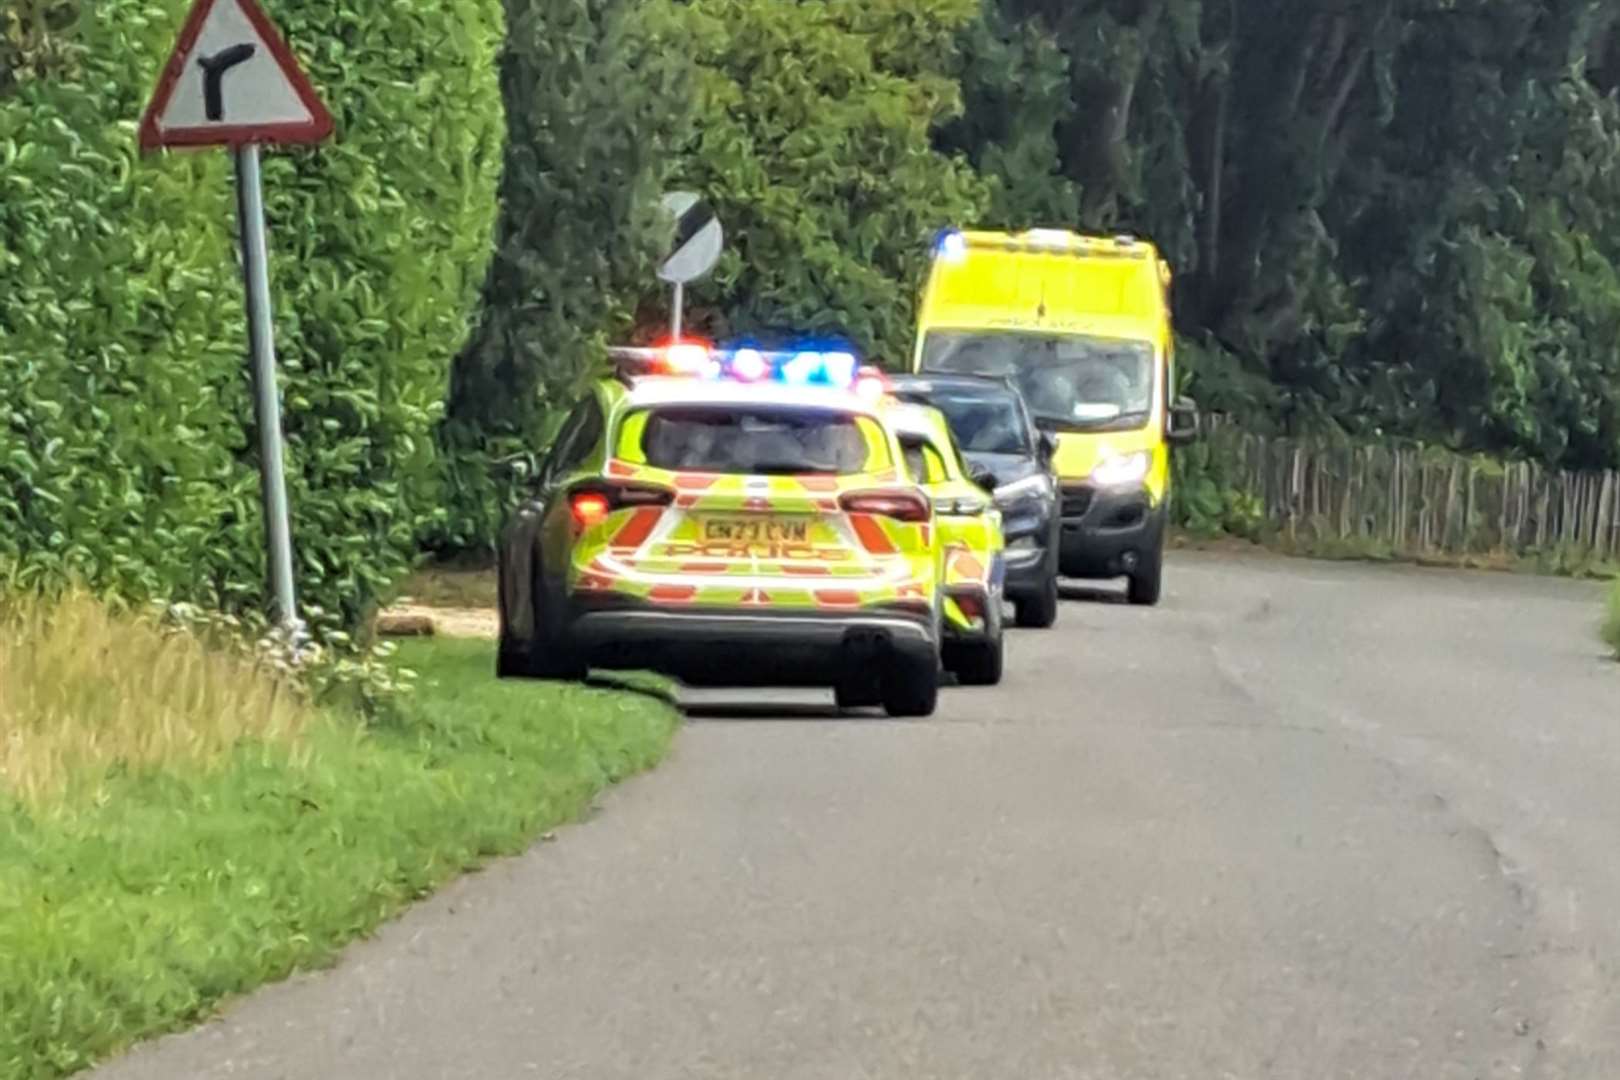 Emergency services have been called to a house in Rolvenden, near Tenterden